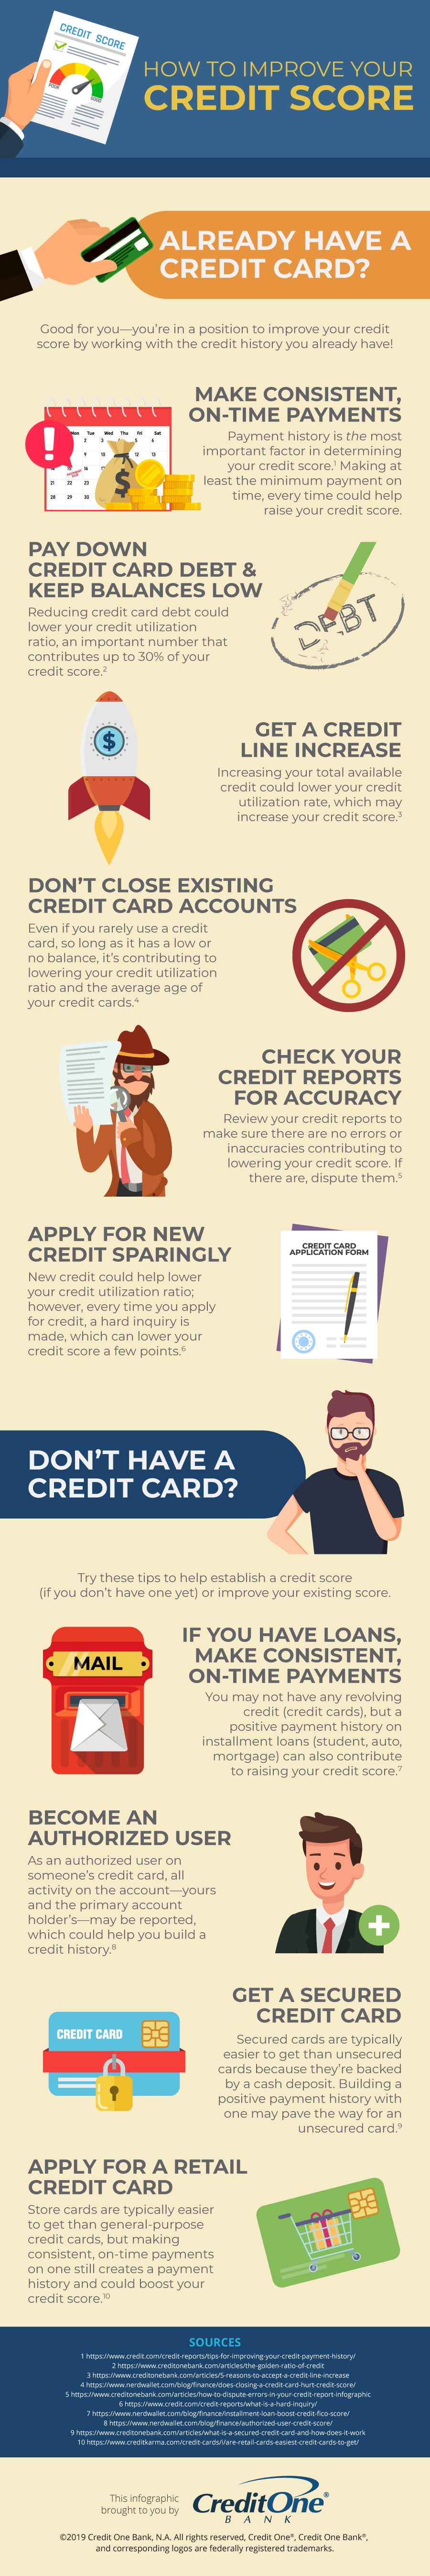 How to Improve Credit Score Infographic